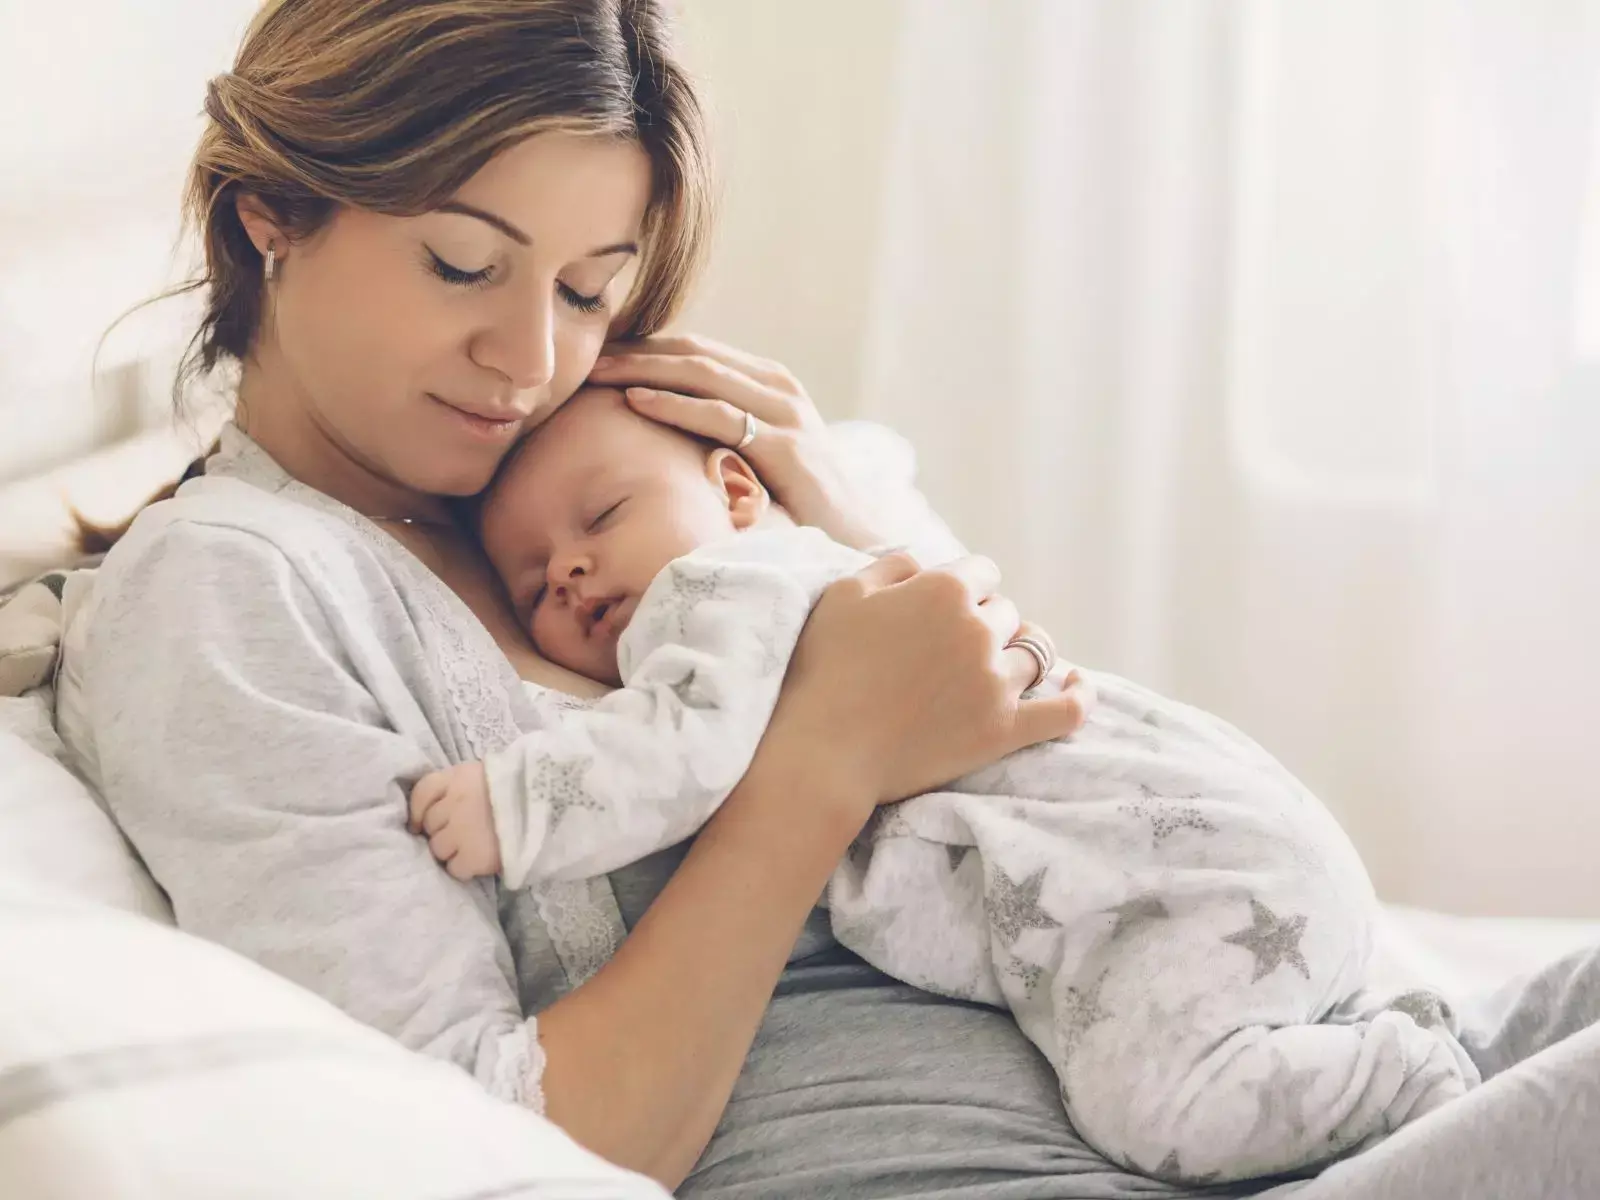 Healing after baby: Postpartum recovery after vaginal delivery